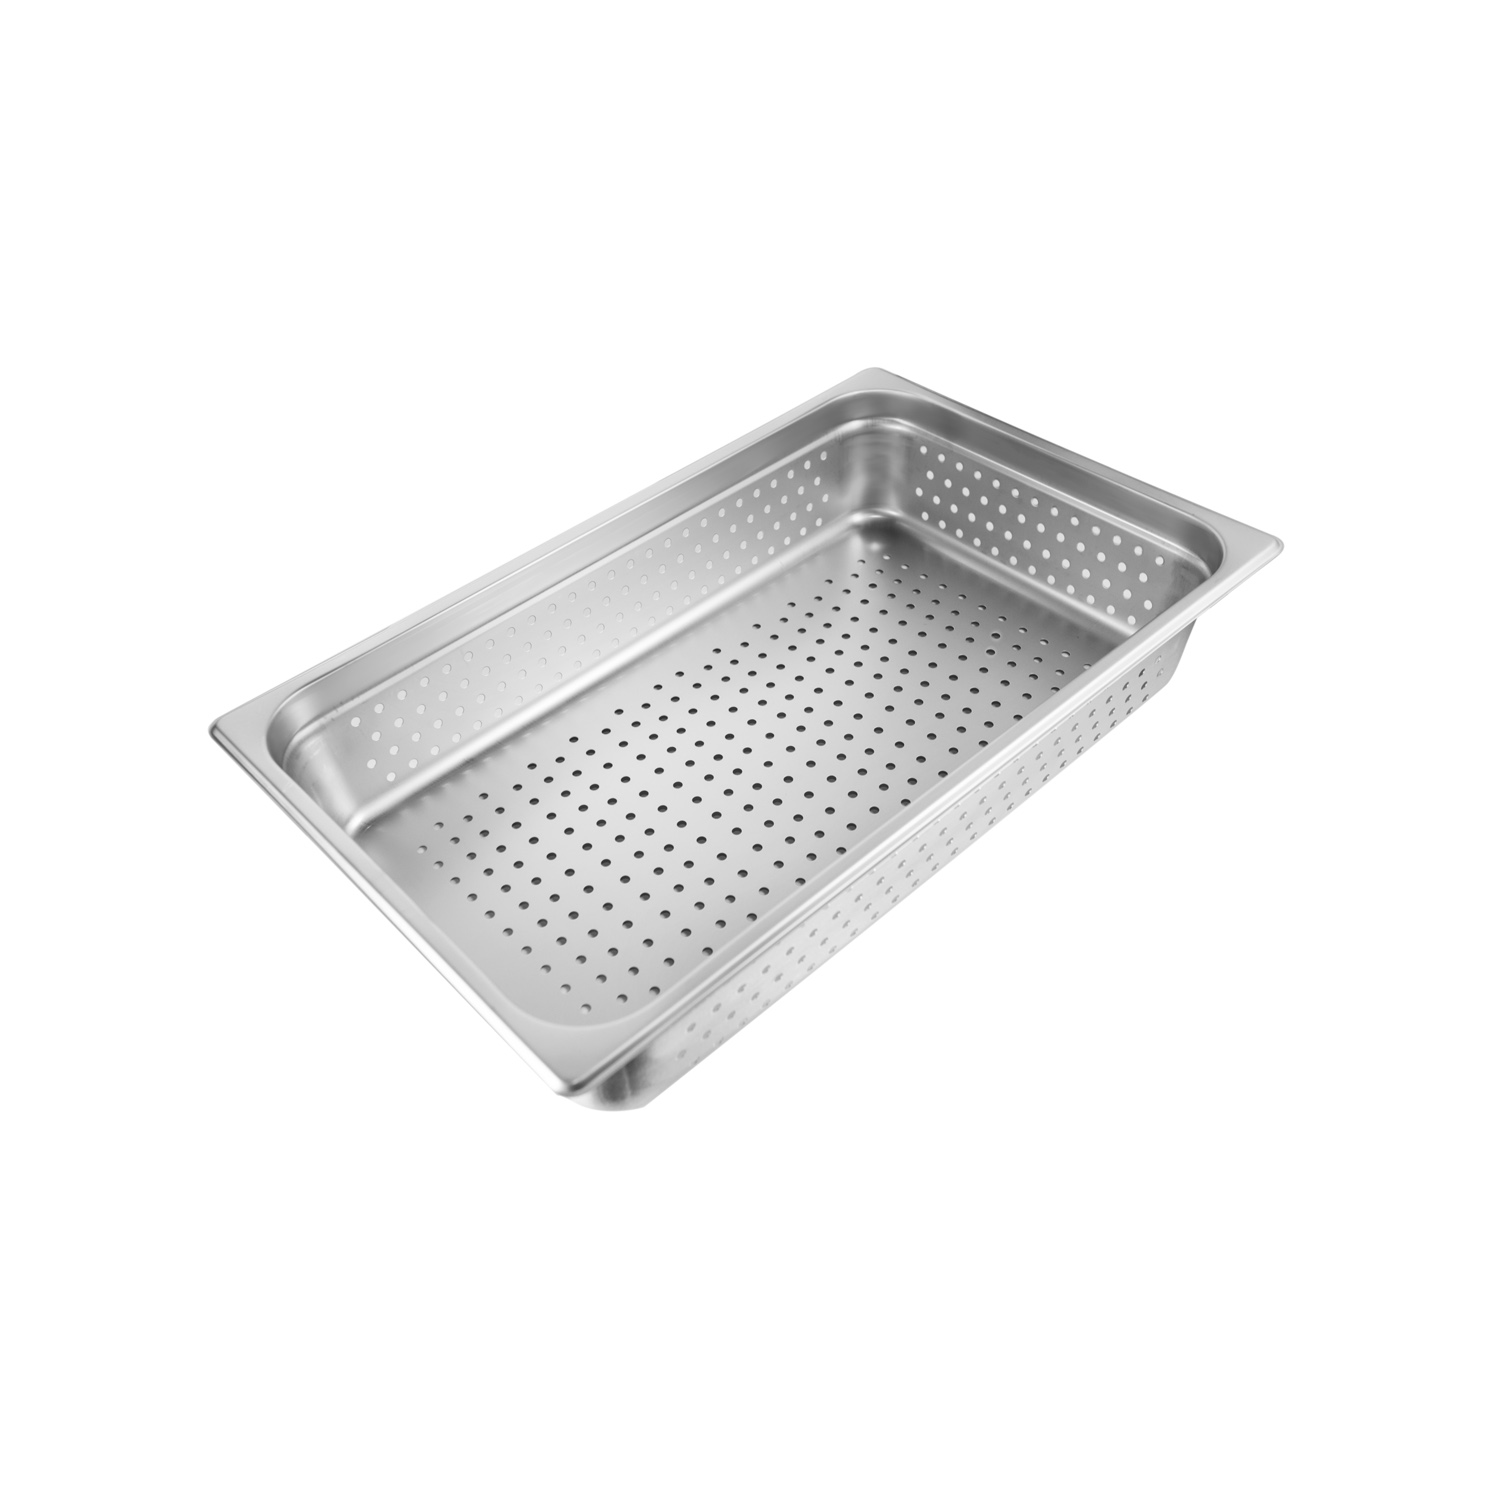 CAC China SSPF-24-4P Full Size 24-Gauge Perforated Stainless Steel Steam Pan 4"